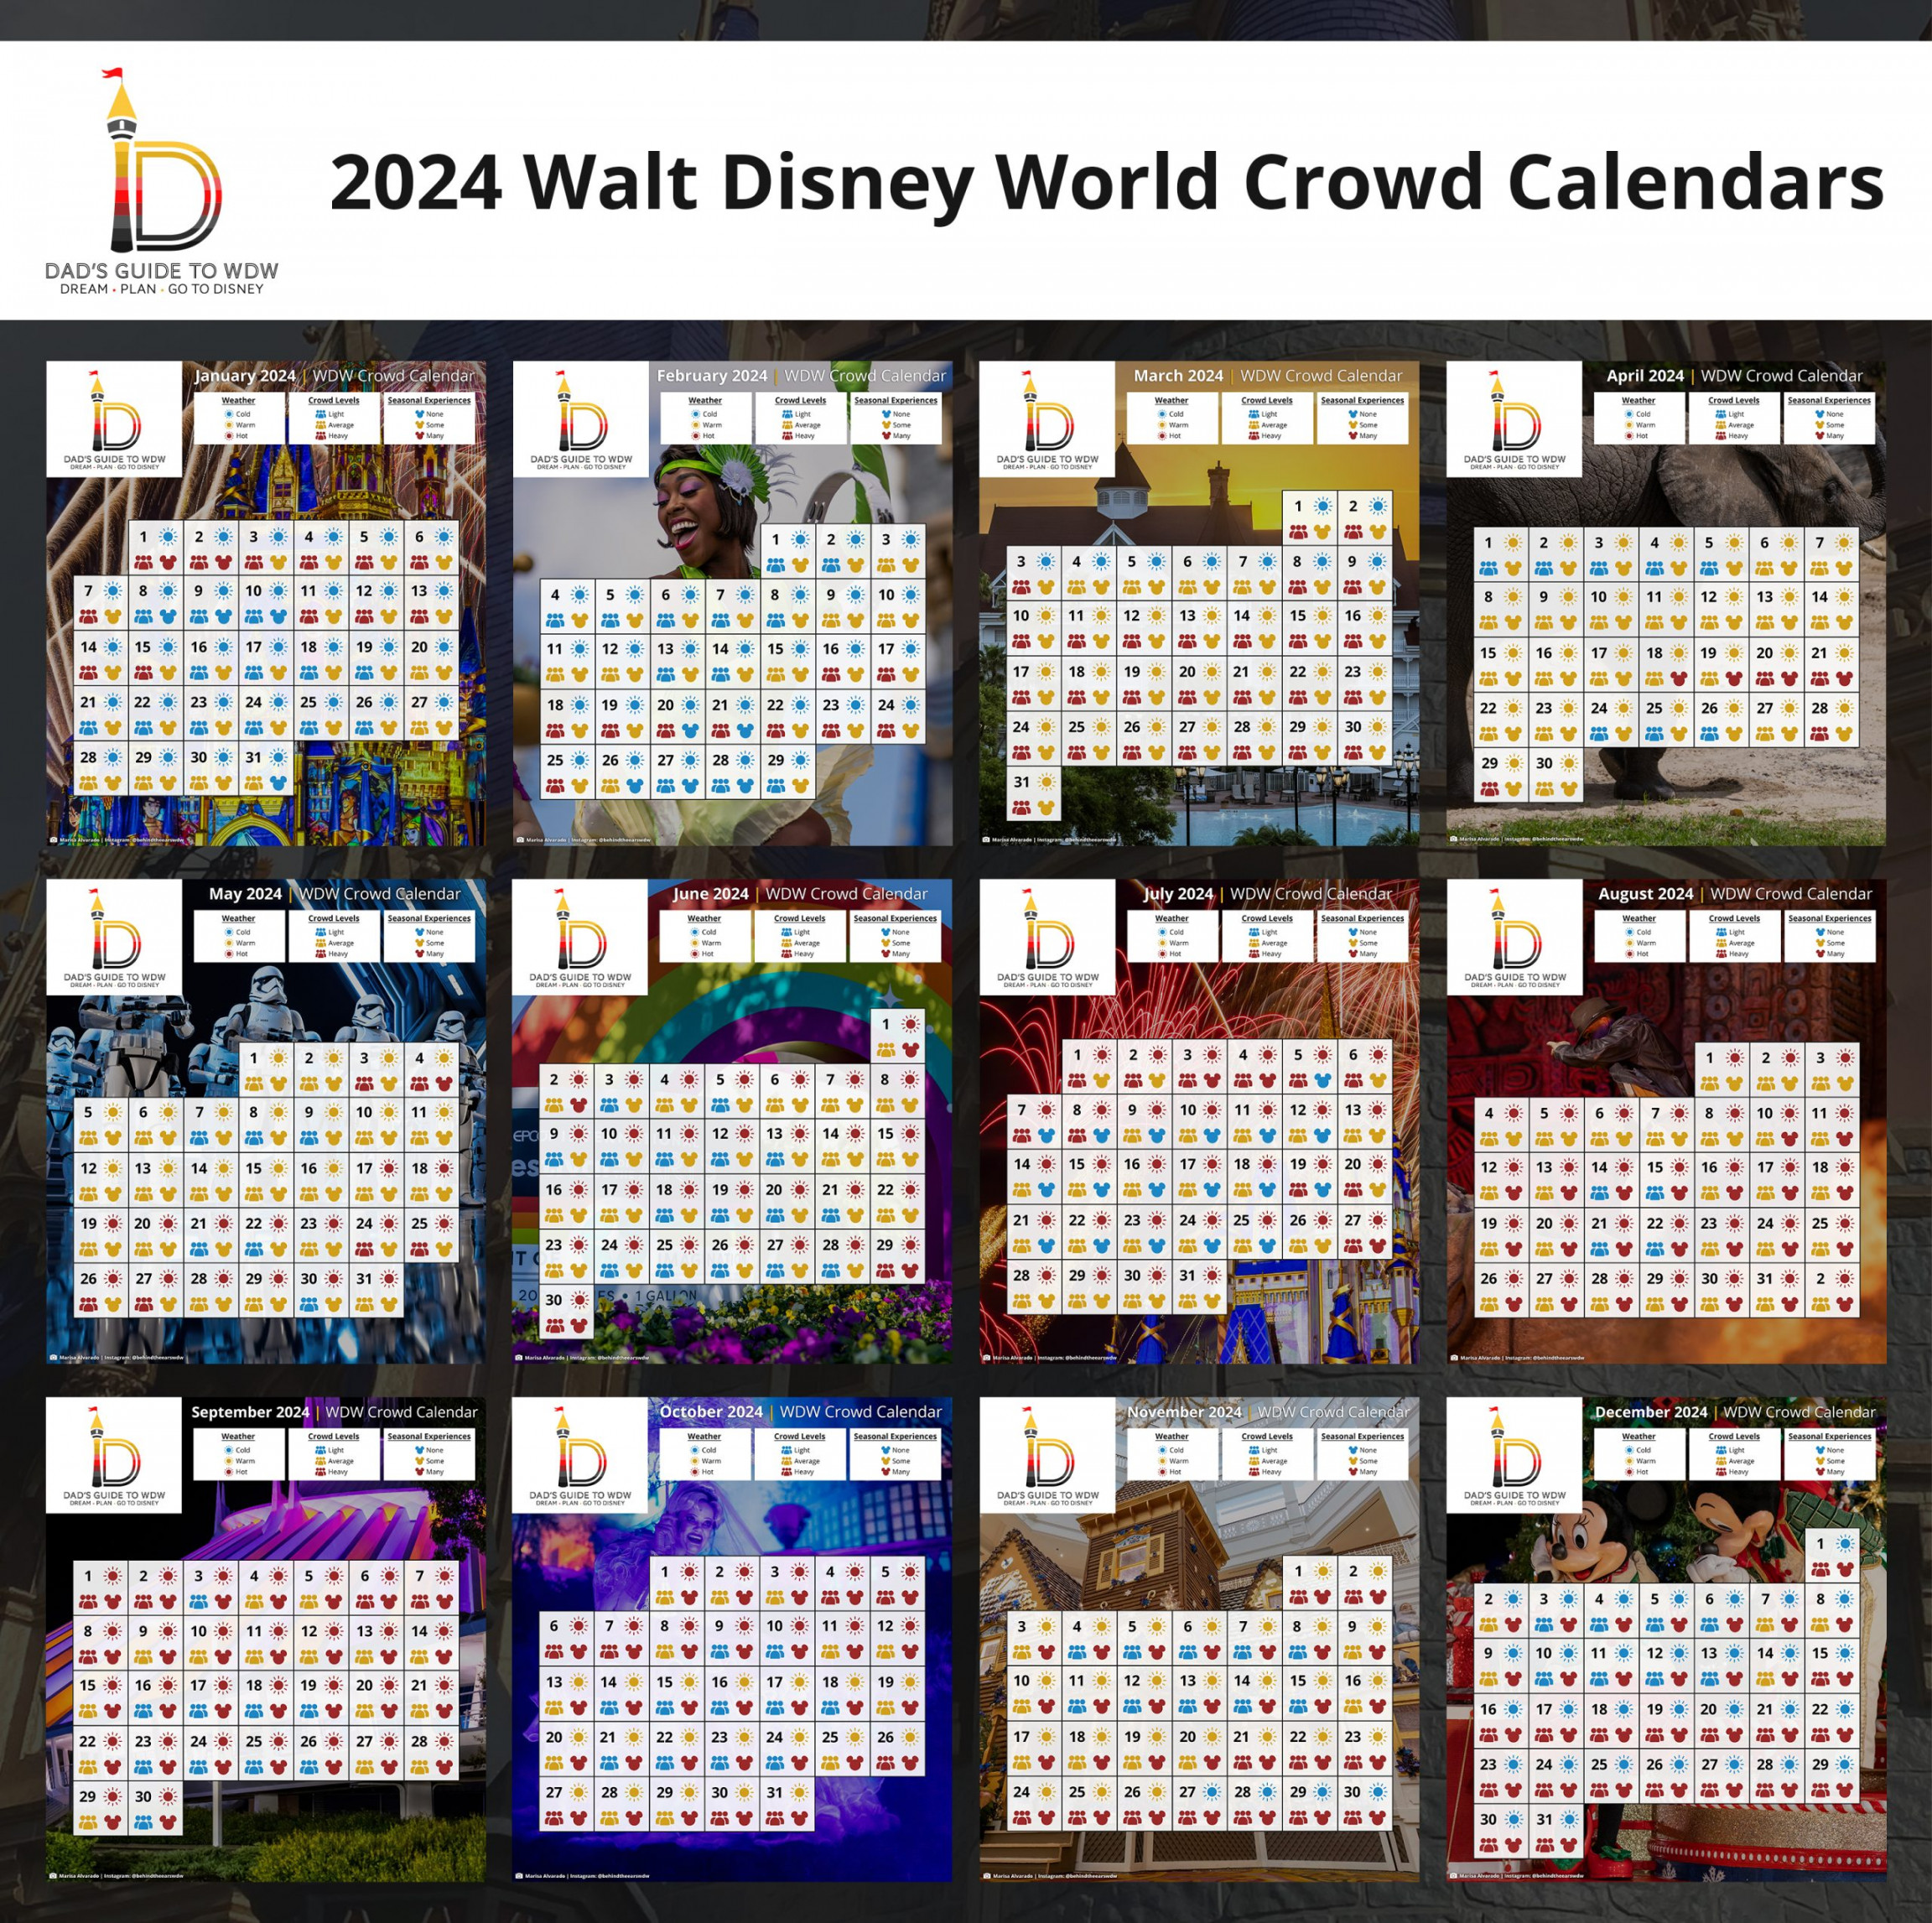 January Disney World crowds including information about the Disney